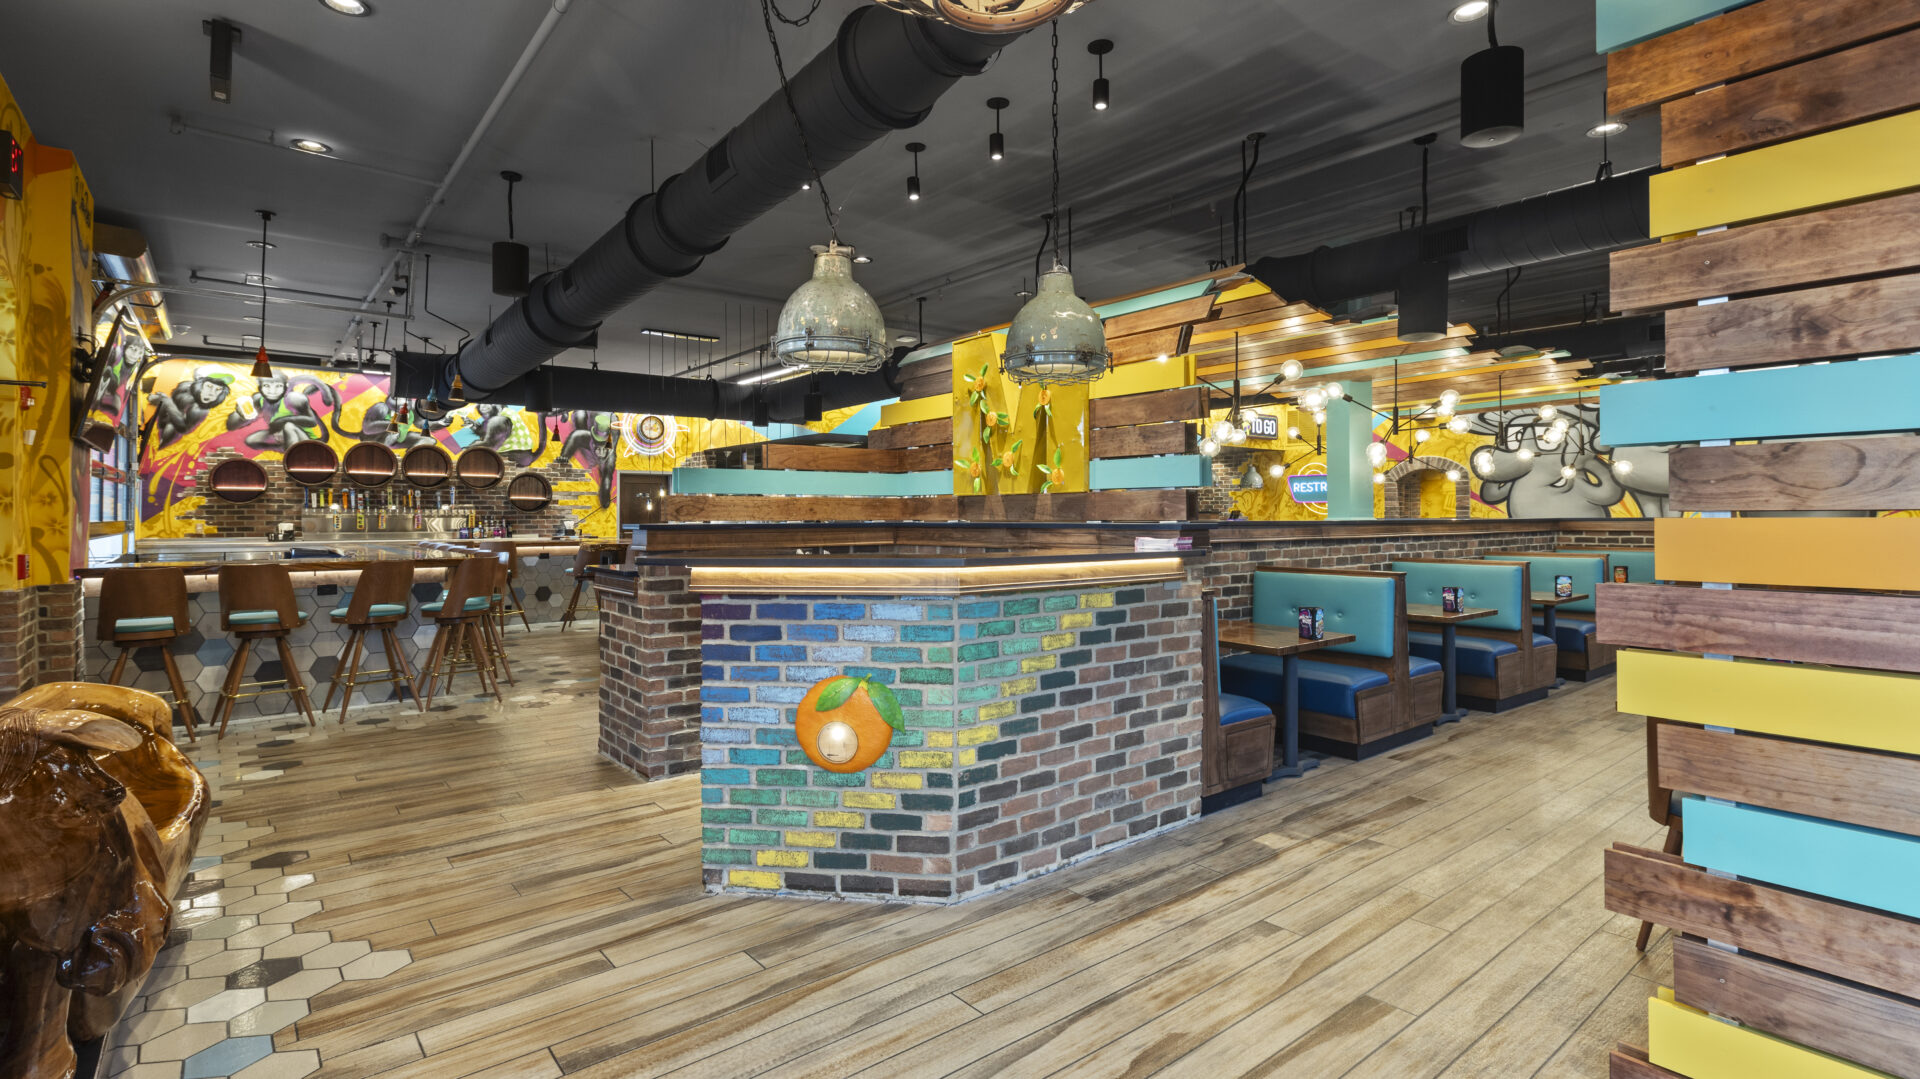 After the construction is complete of the Mellow Mushroom in Ocala, Florida